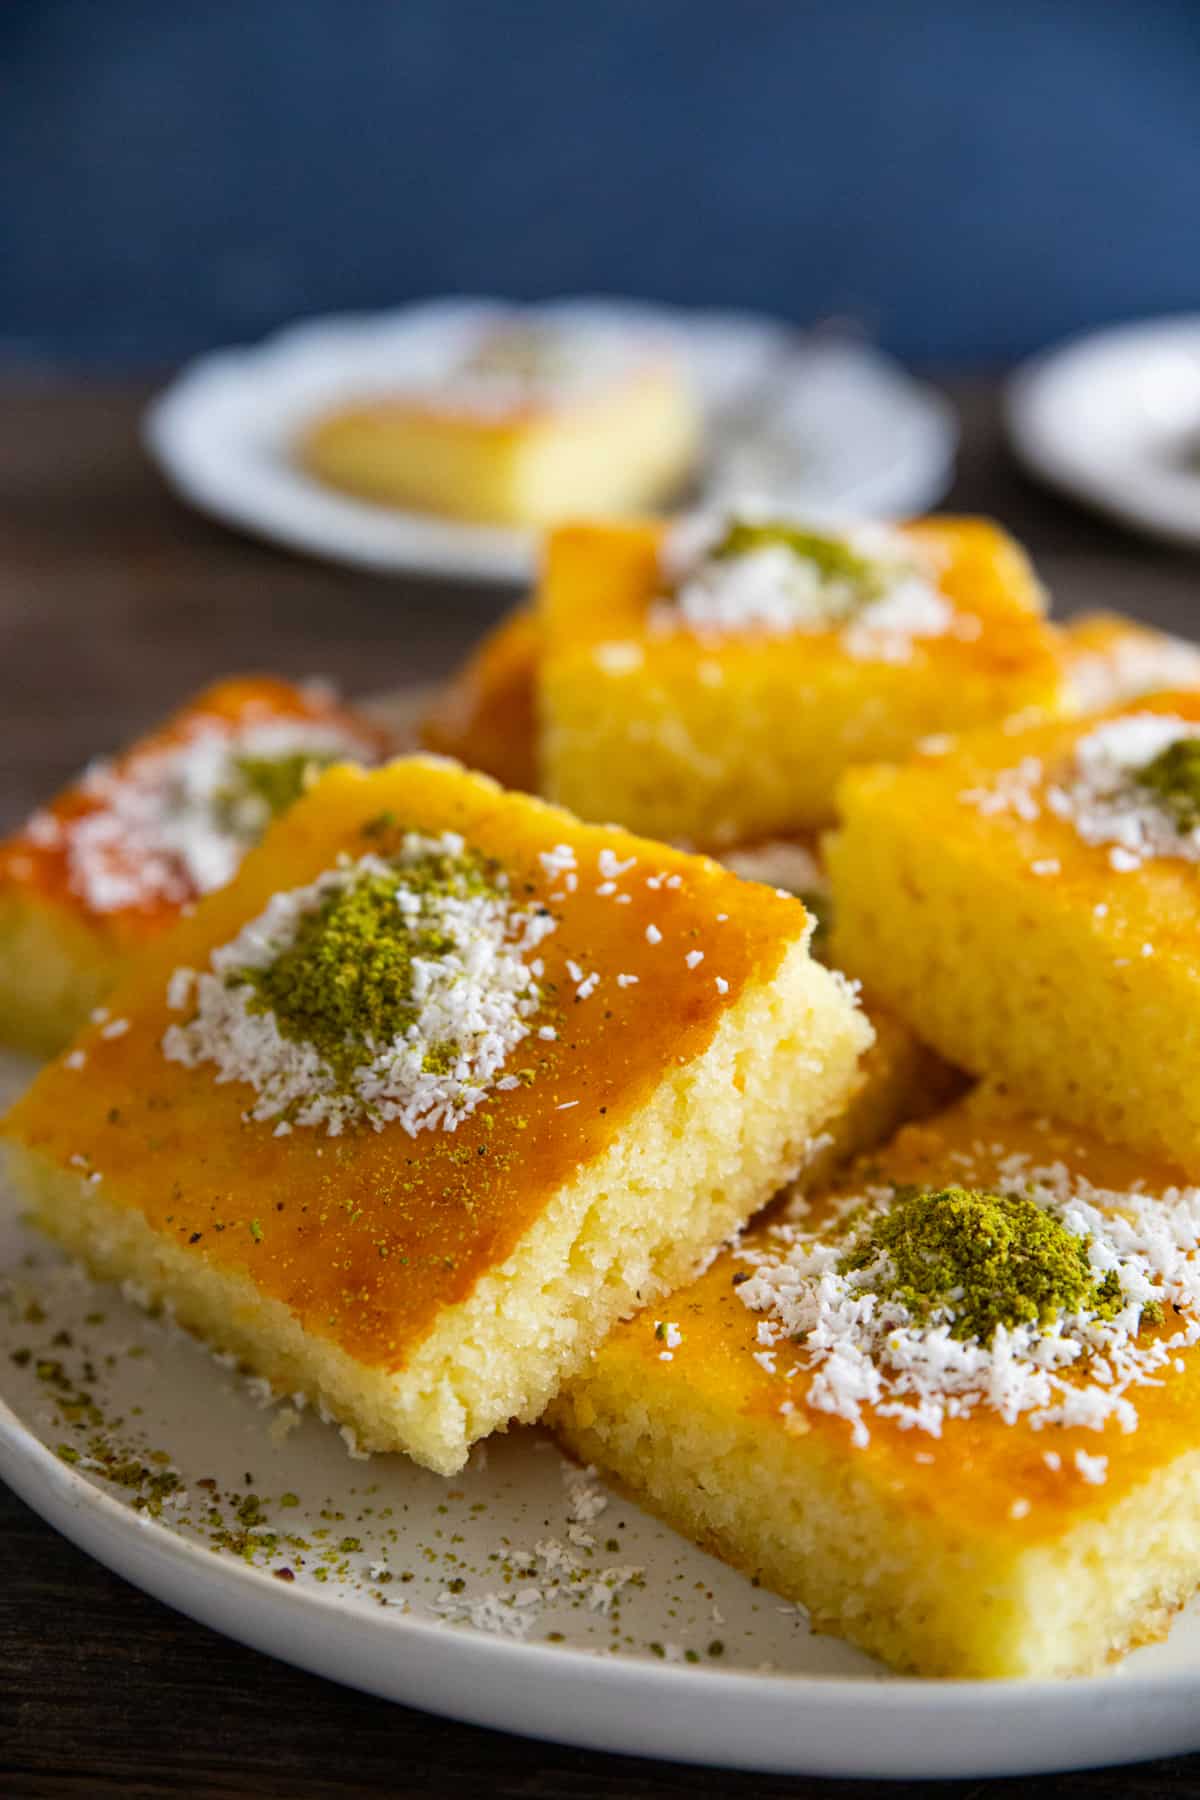 Revani is a classic semolina cake that's easy and so delicious. Soaked in a light simple syrup, this cake is popular throughout the Middle East and Mediterranean.
